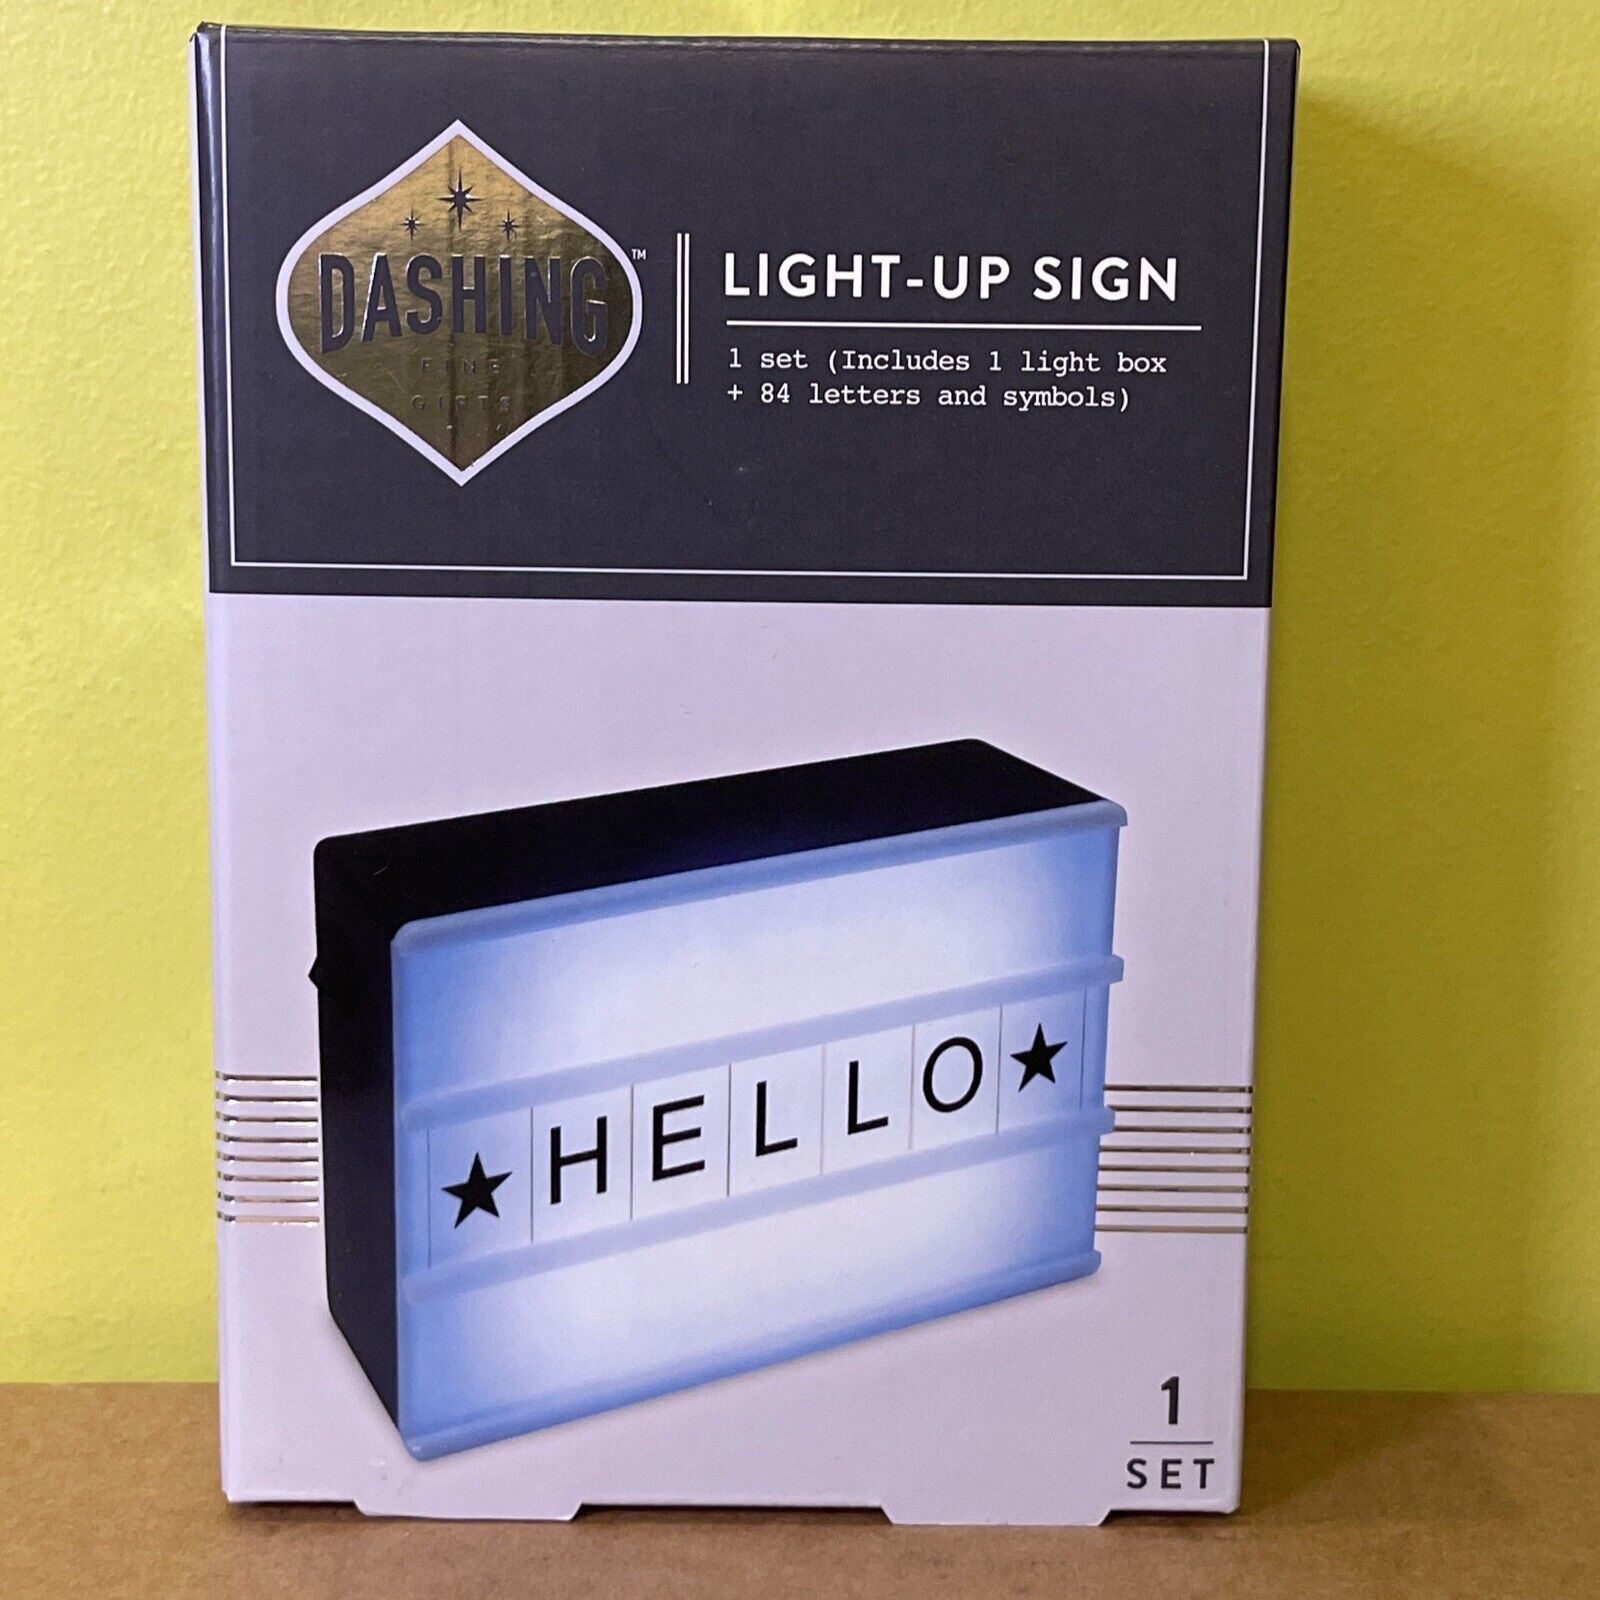 Dashing Fine Gifts Light-Up Sign Includes 1 light box + 84 letters & Symbols NEW